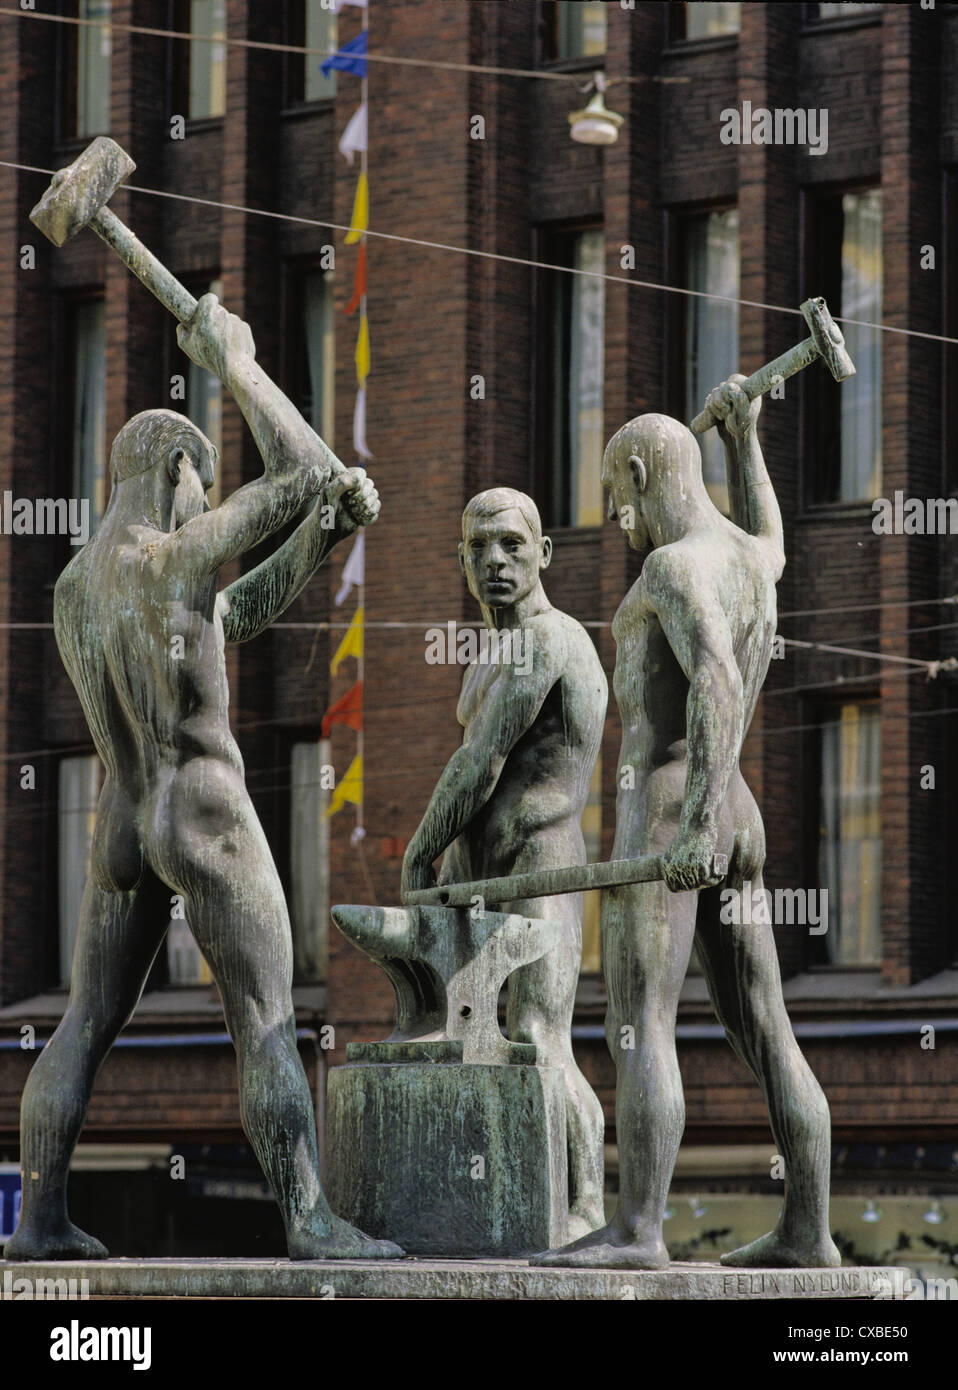 The 1932 bronze sculpture, The Three Smiths by Felix Nylund in Helsinki, Finland Stock Photo